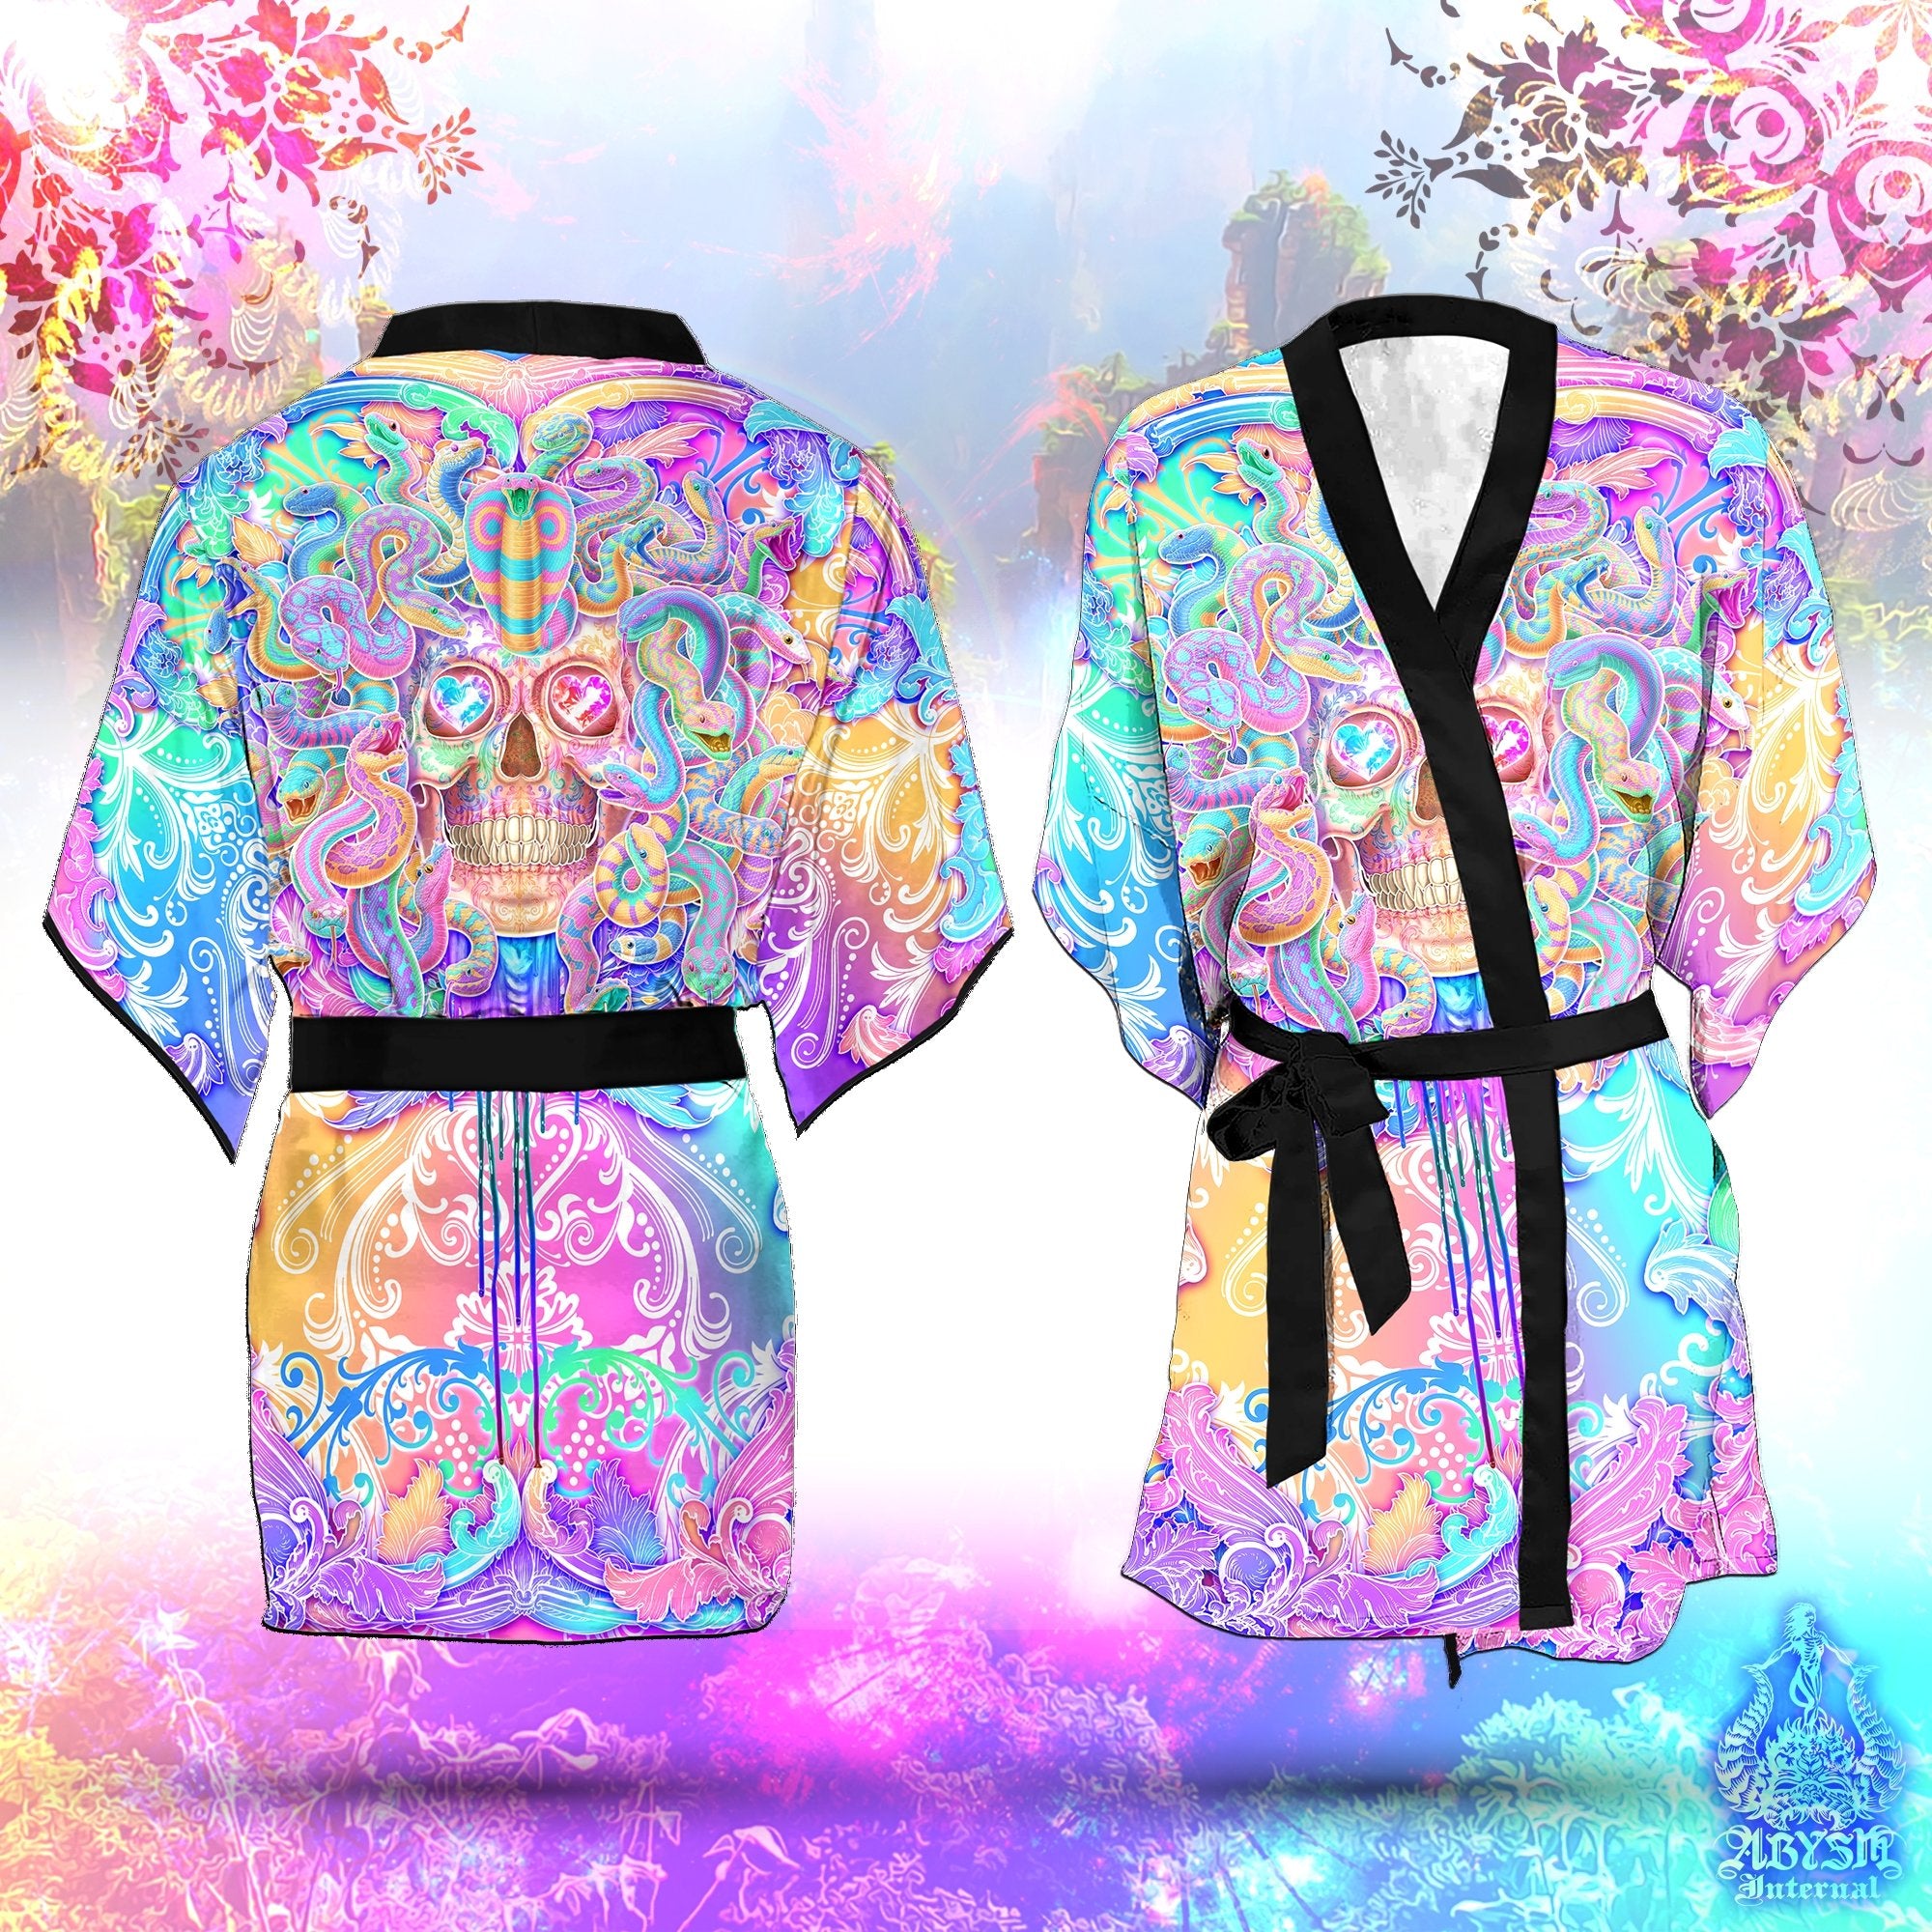 Medusa Skull Cover Up, Beach Rave Outfit, Party Kimono, Summer Festival Robe, Aesthetic Indie and Alternative Clothing, Unisex - Holographic Pastel - Abysm Internal